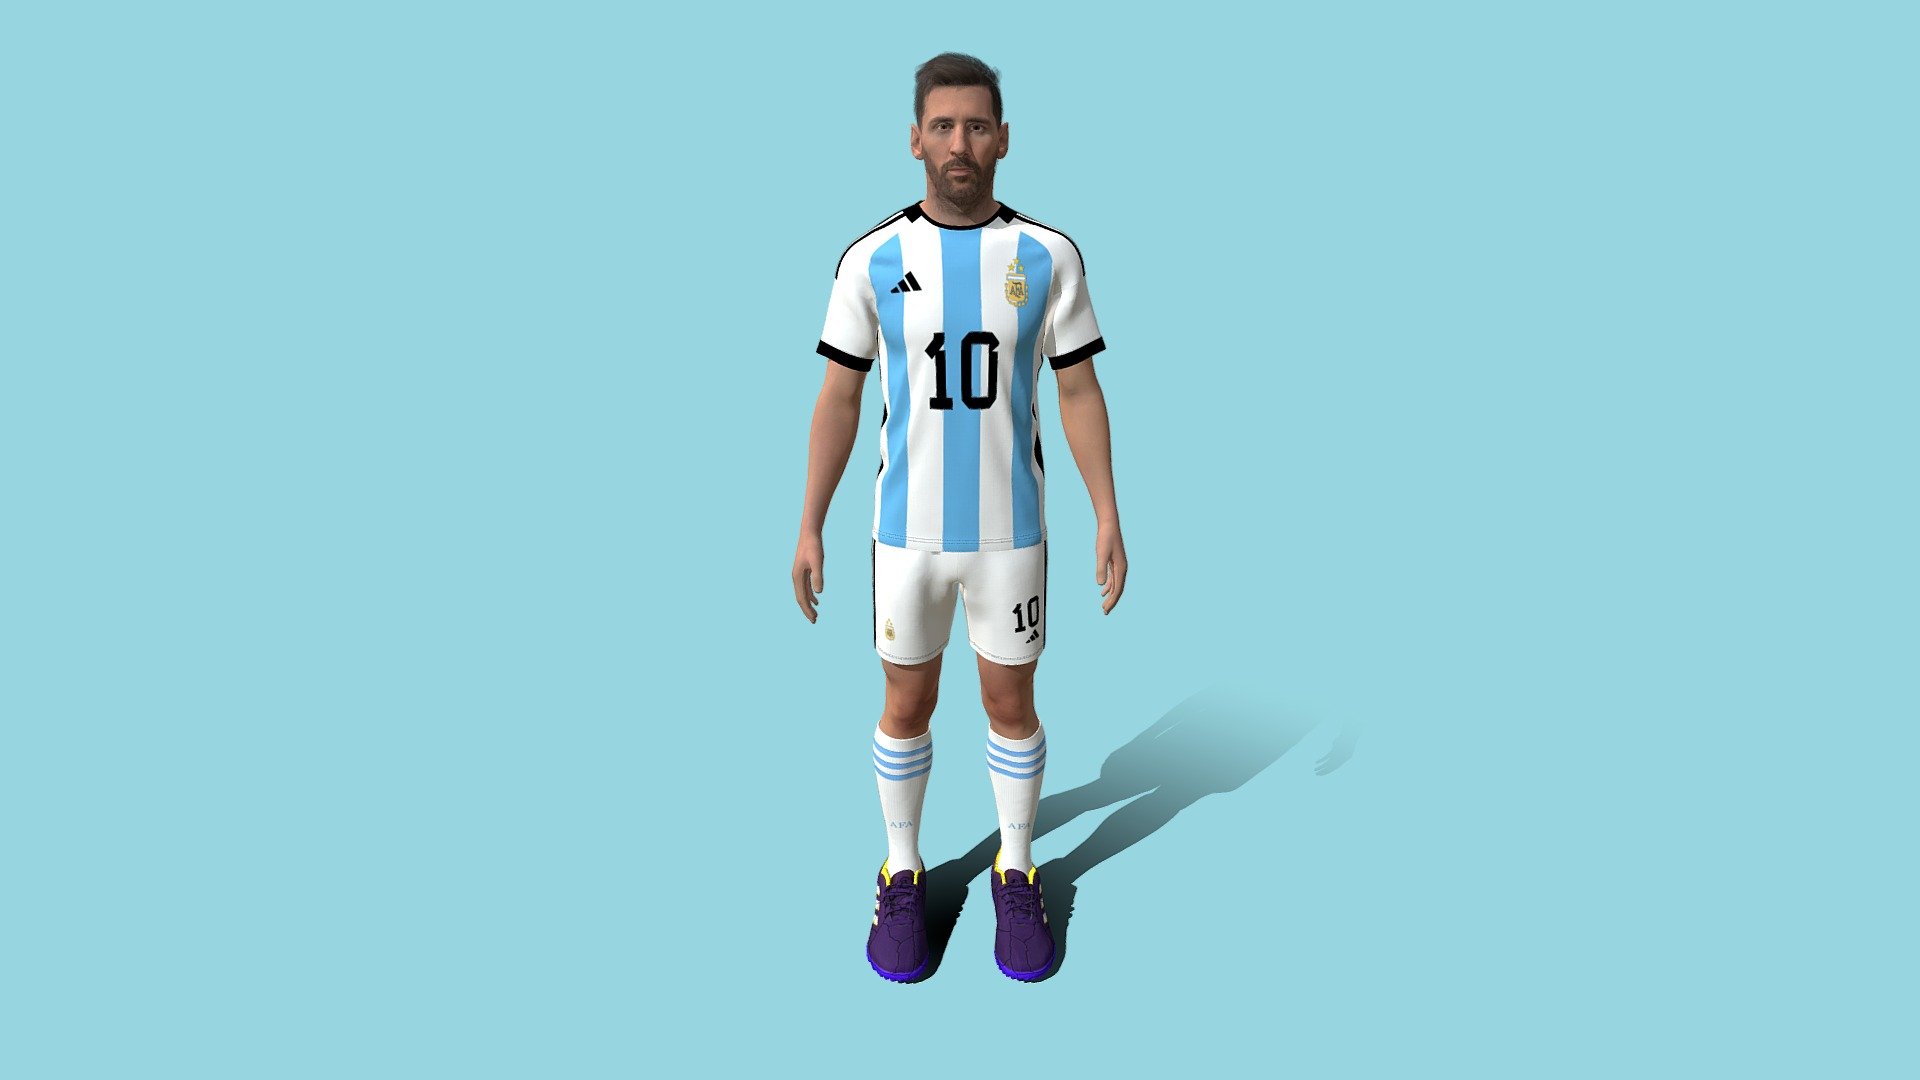 Cloth Title = Argentina Messi New Jersey Design 2022 

SKU = DG100268 

Category = Men 

Product Type = Jersey + Pant + Socks + Football Boot 

Cloth Length = Regular 

Body Fit = Regular Fit 

Occasion = Casual  

Sleeve Style = Raglan Sleeve 


Our Services:

3D Apparel Design.

OBJ,FBX,GLTF Making with High/Low Poly.

Fabric Digitalization.

Mockup making.

3D Teck Pack

Pattern Making

2D Illustration

Cloth Animation and 360 Spin Video


Contact us:- 

Email: info@digitalfashionwear.com 

Website: https://digitalfashionwear.com 


We designed all the types of cloth specially focused on product visualization, e-commerce, fitting, and production. 

We will design: 

T-shirts 

Polo shirts 

Hoodies 

Sweatshirt 

Jackets 

Shirts 

TankTops 

Trousers 

Bras 

Underwear 

Blazer 

Aprons 

Leggings 

and All Fashion items. 




Our goal is to make sure what we provide you, meets your demand 3d model